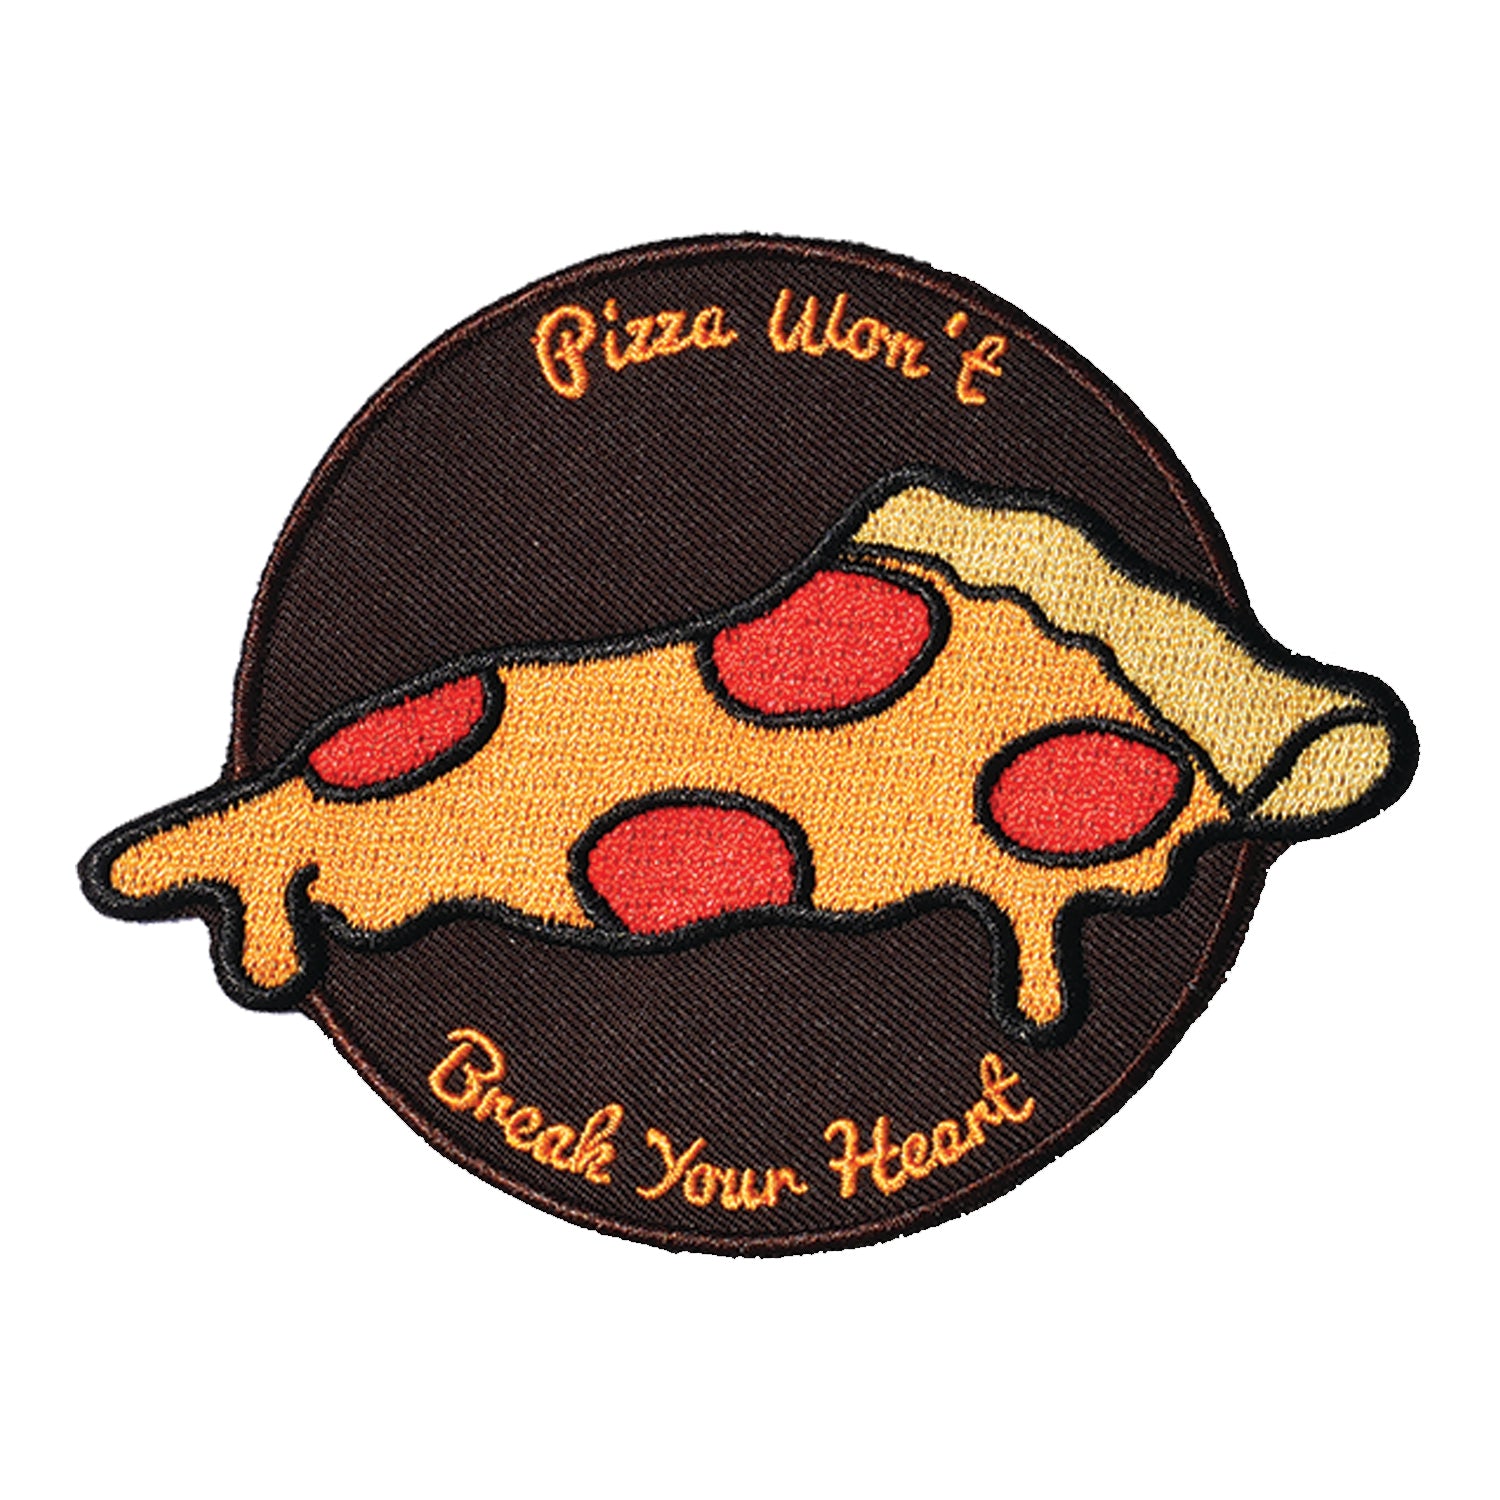 Pizza Won't Break Your Heart Embroidered Patch - Retrograde Supply Co